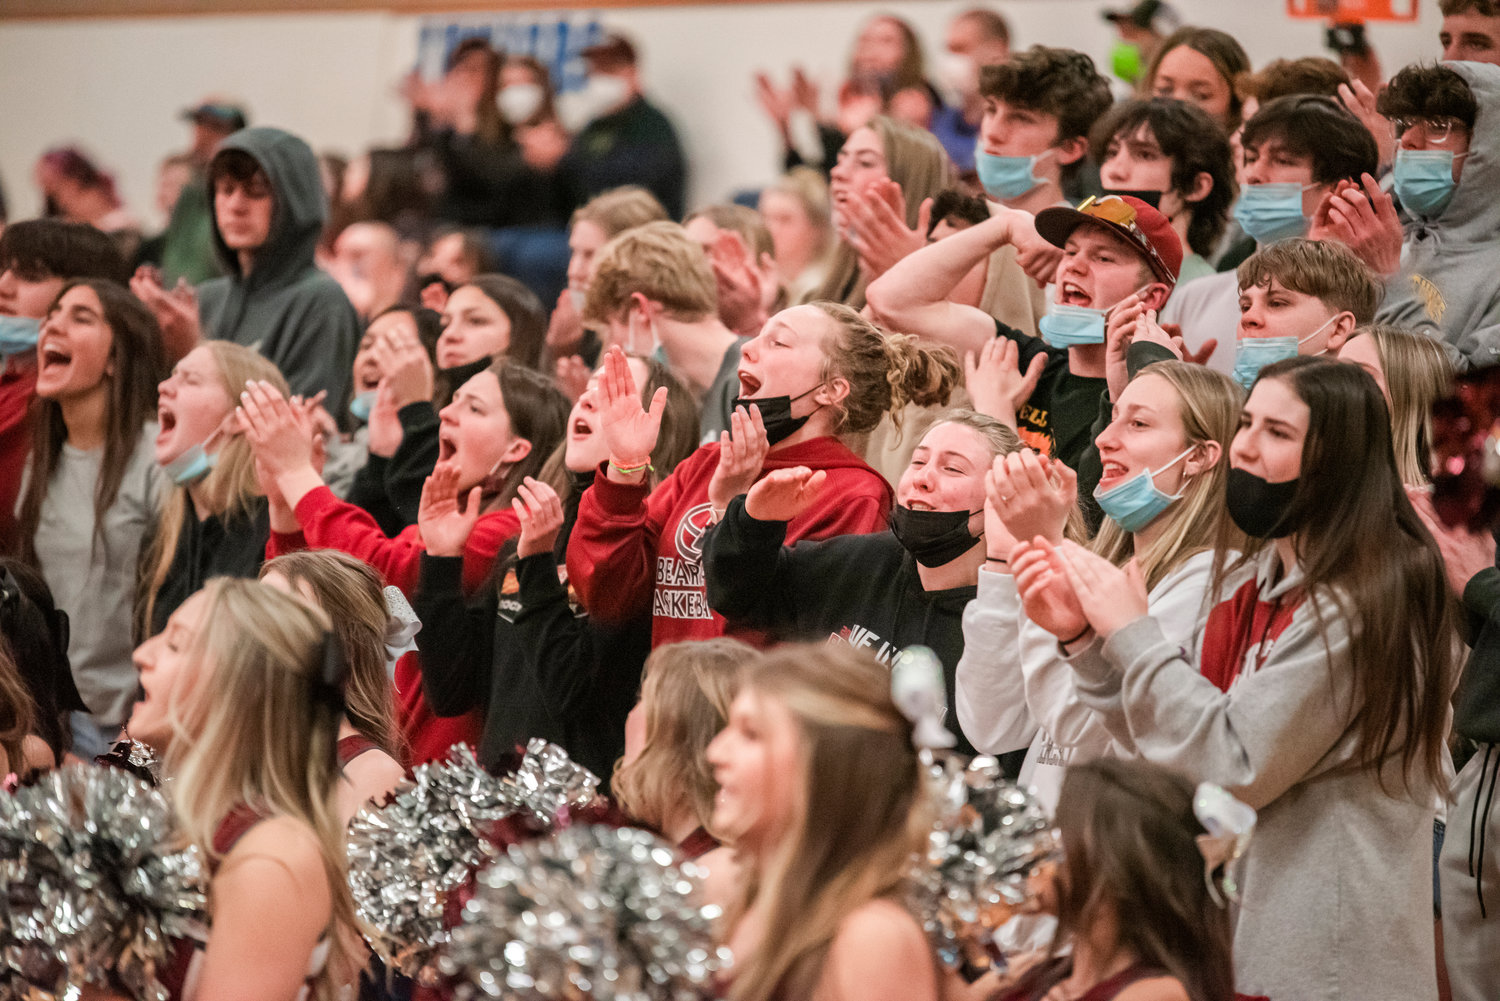 Bearcat fans cheer during a game in Rochester Tuesday night.